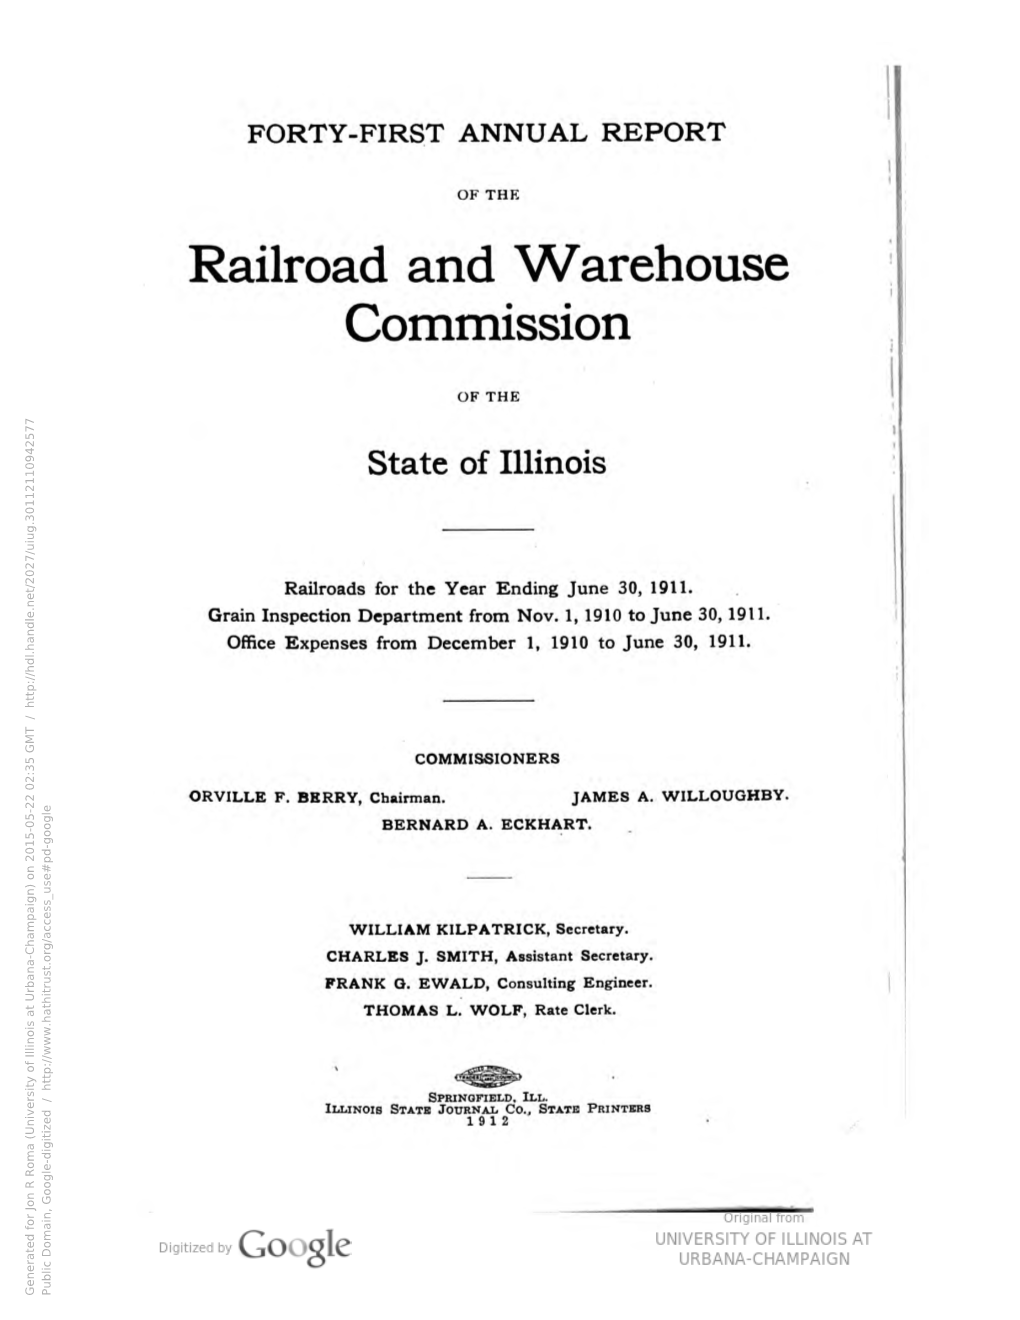 Annual Report of the Railroad and Warehouse Commission of The